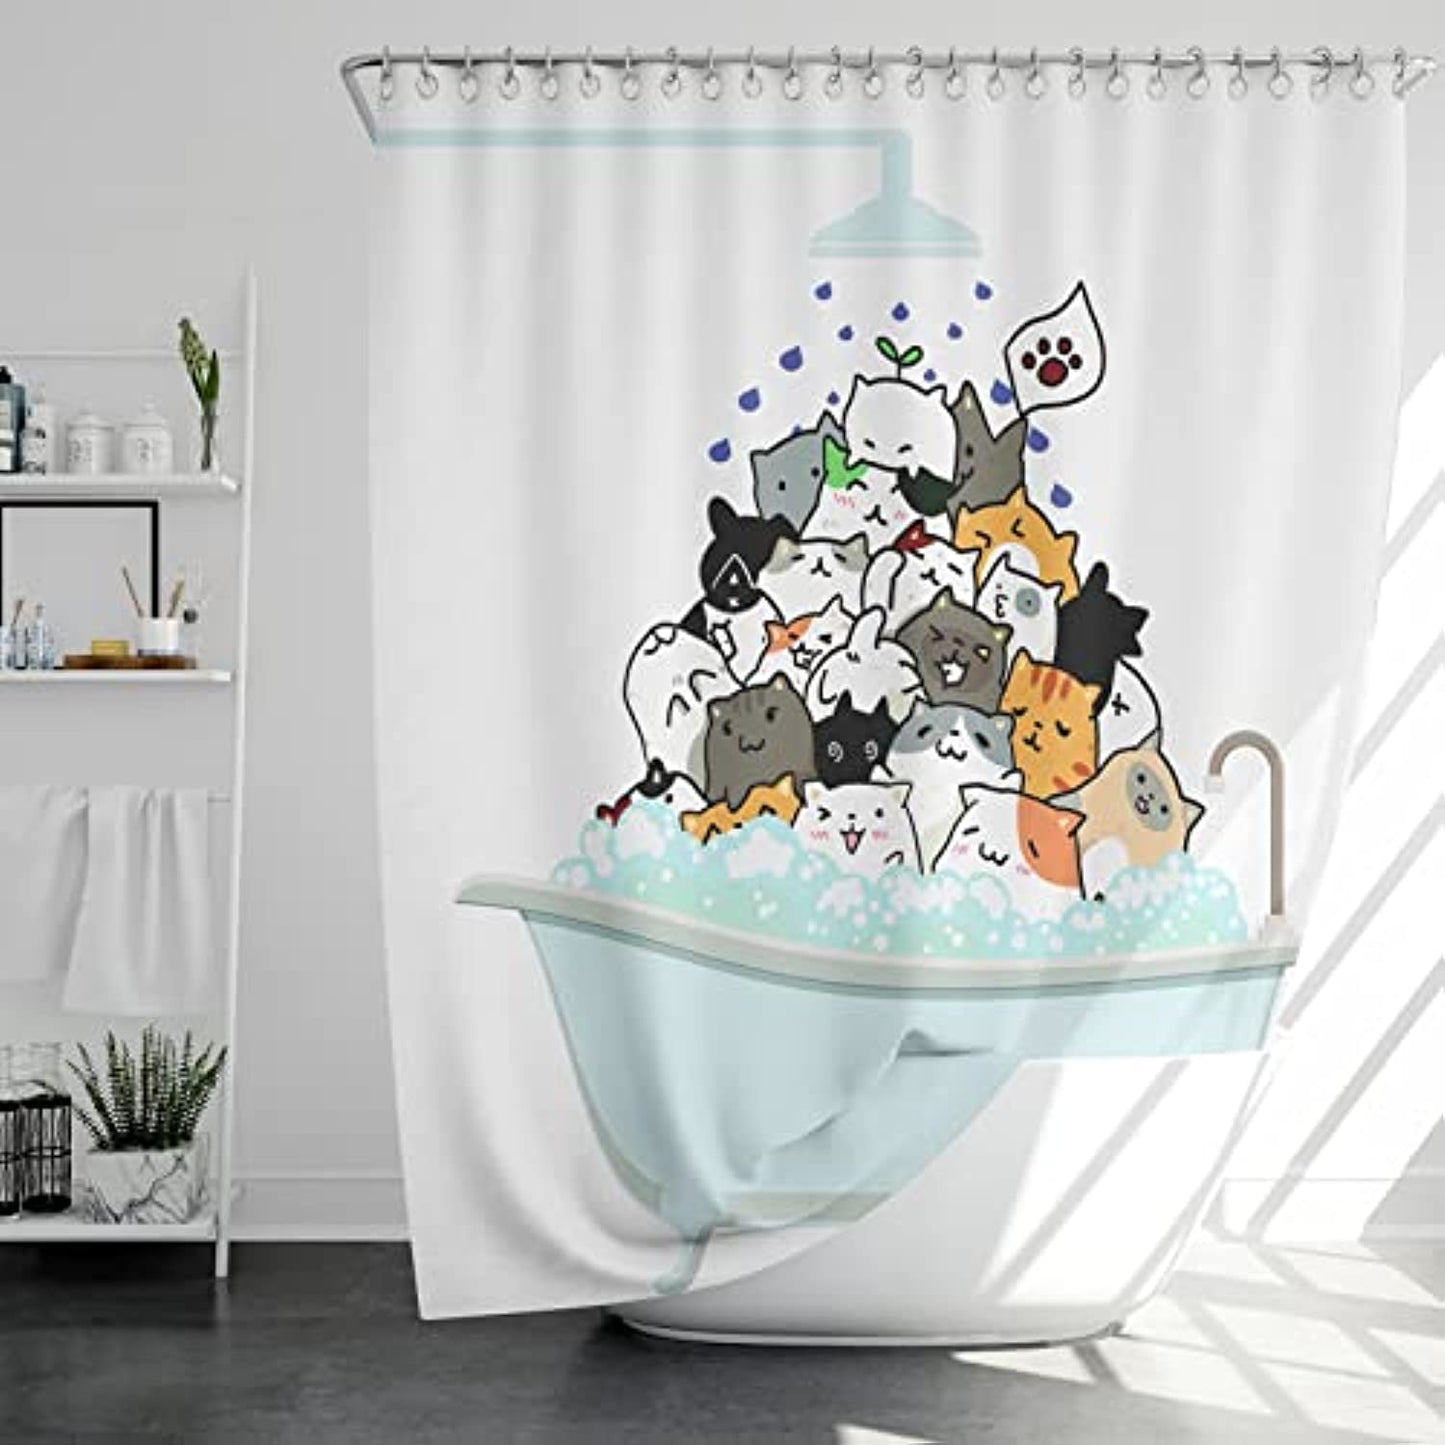 Cute Funny Cats Shower Curtain Kwaii Pets Colorful Hilarious Bath Curtain Cartoon Cat Paw Blue Tub Waterproof Fabric Polyester Curtain for Bathroom  with 12 Hooks  72x72